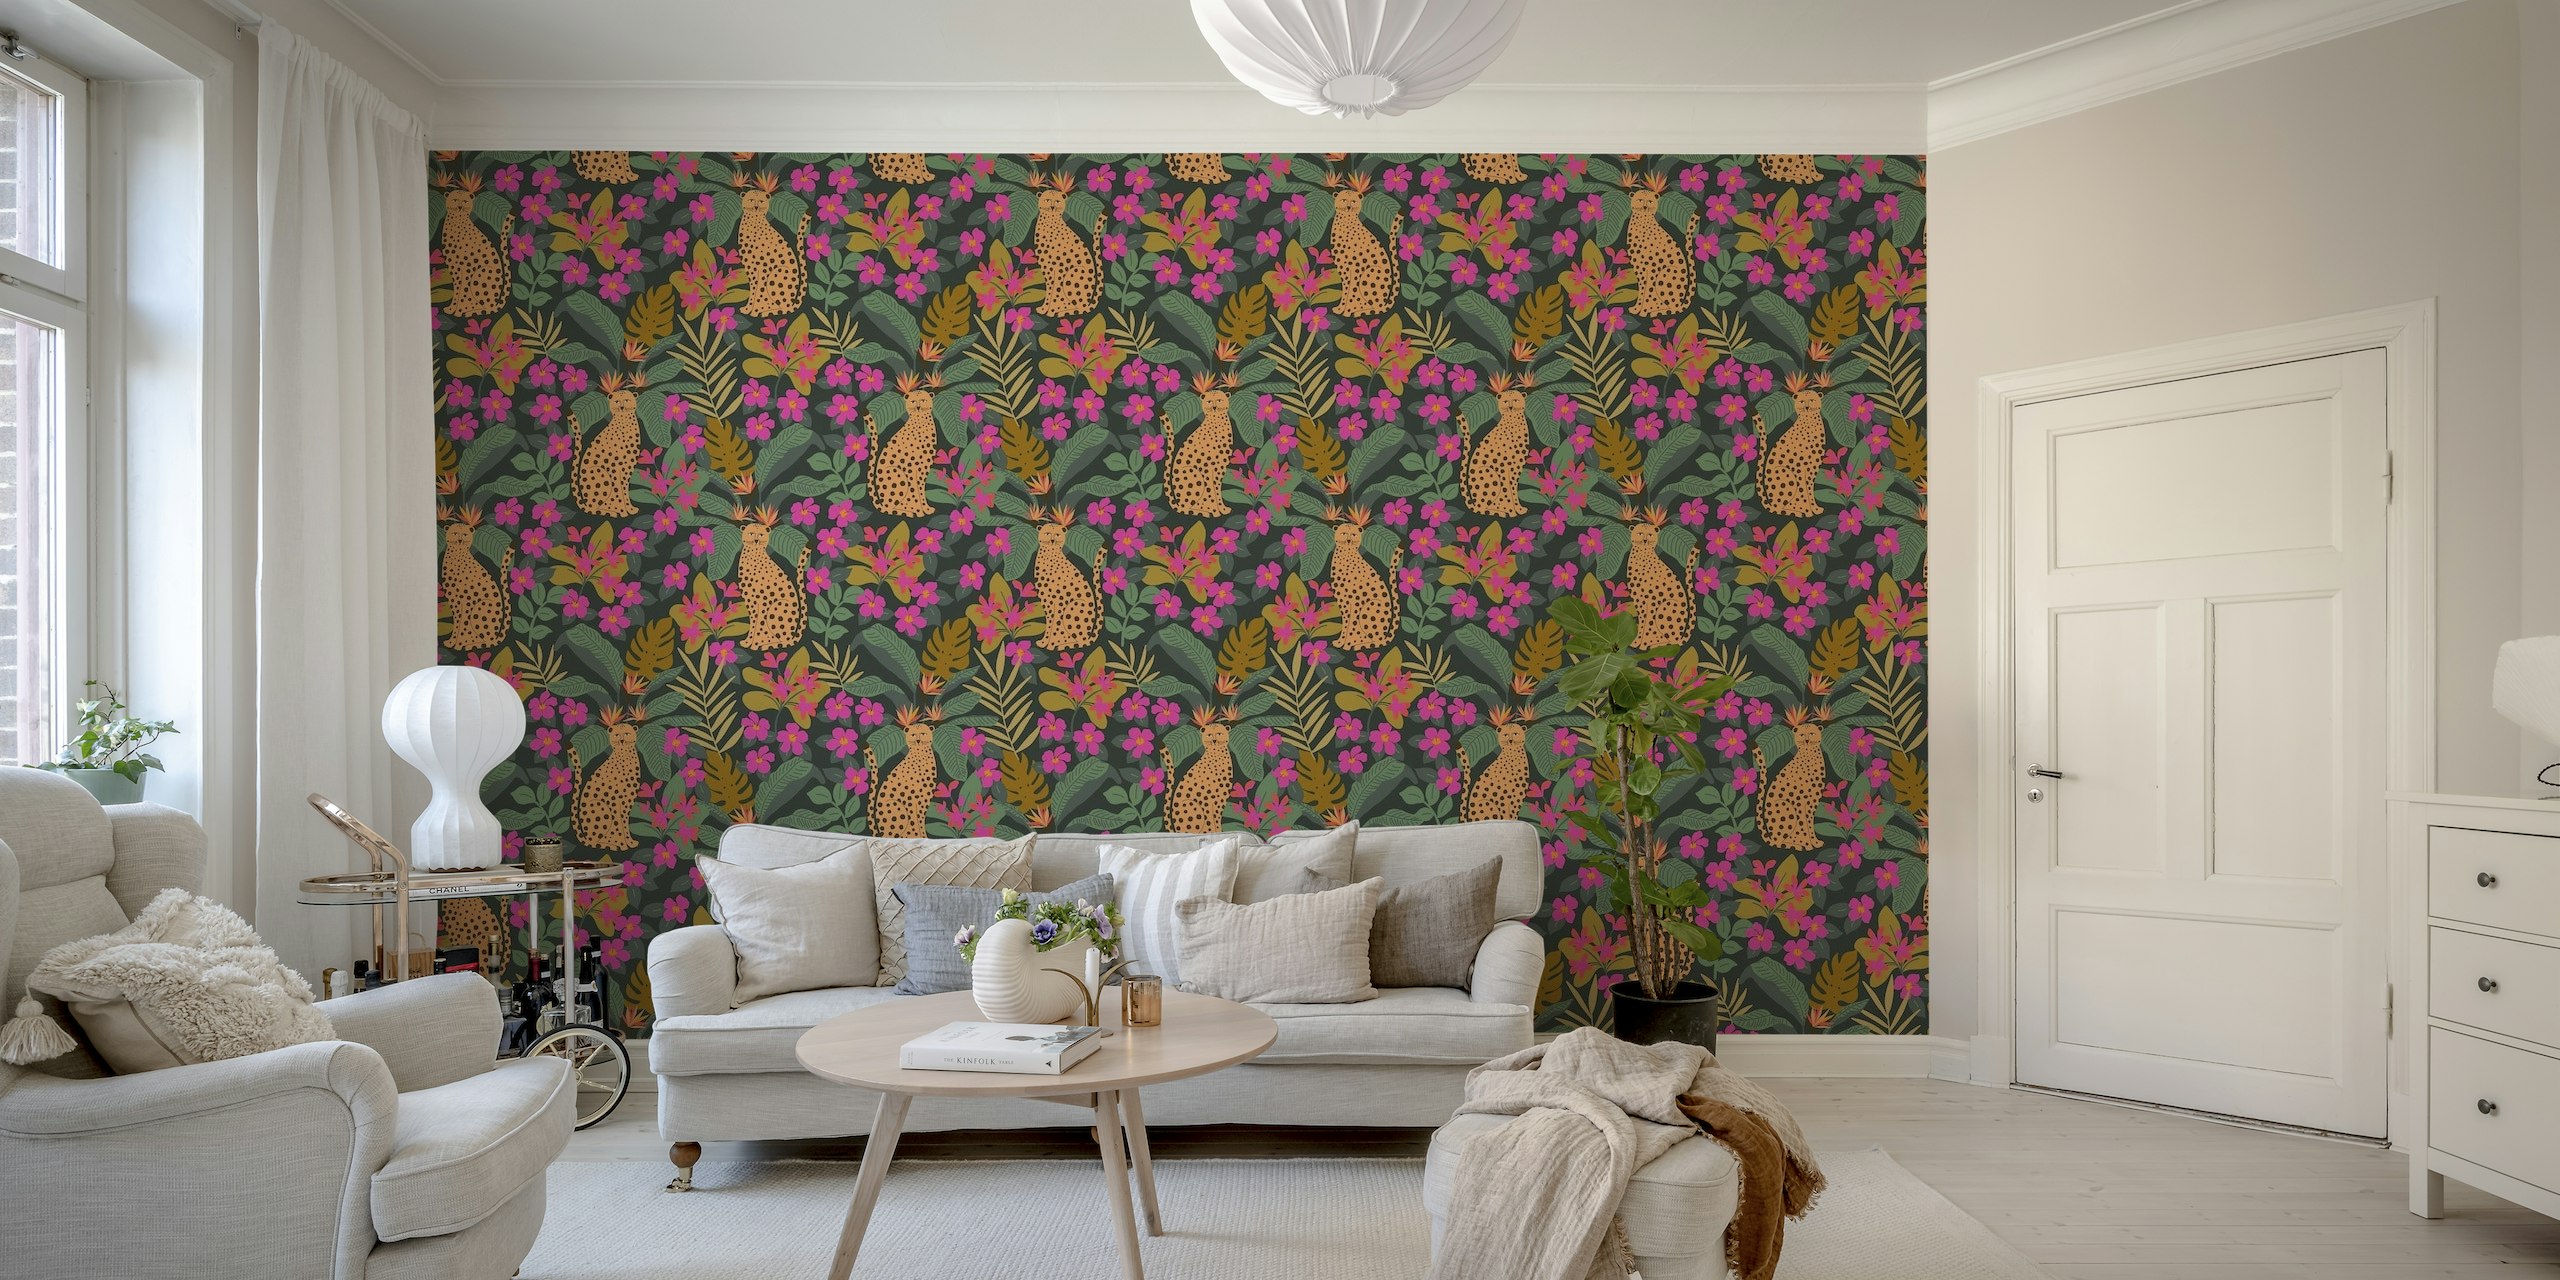 Hot Pink Jungle wall mural with leopards and tropical flowers